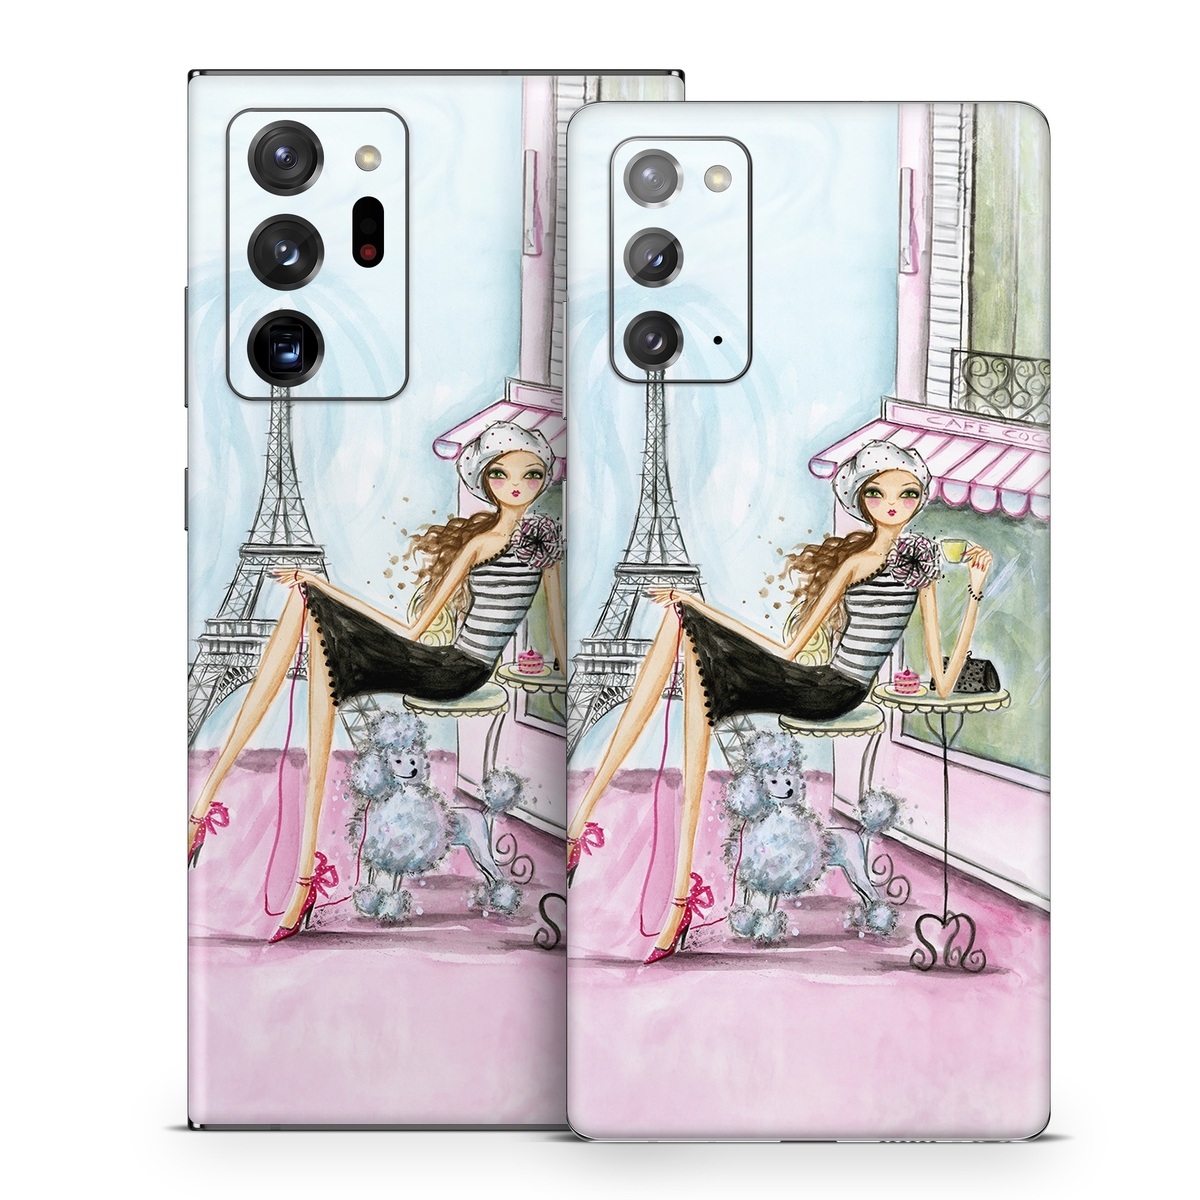 Samsung Galaxy Note 20 Series Skin design of Pink, Illustration, Sitting, Konghou, Watercolor paint, Fashion illustration, Art, Drawing, Style, with gray, purple, blue, black, pink colors